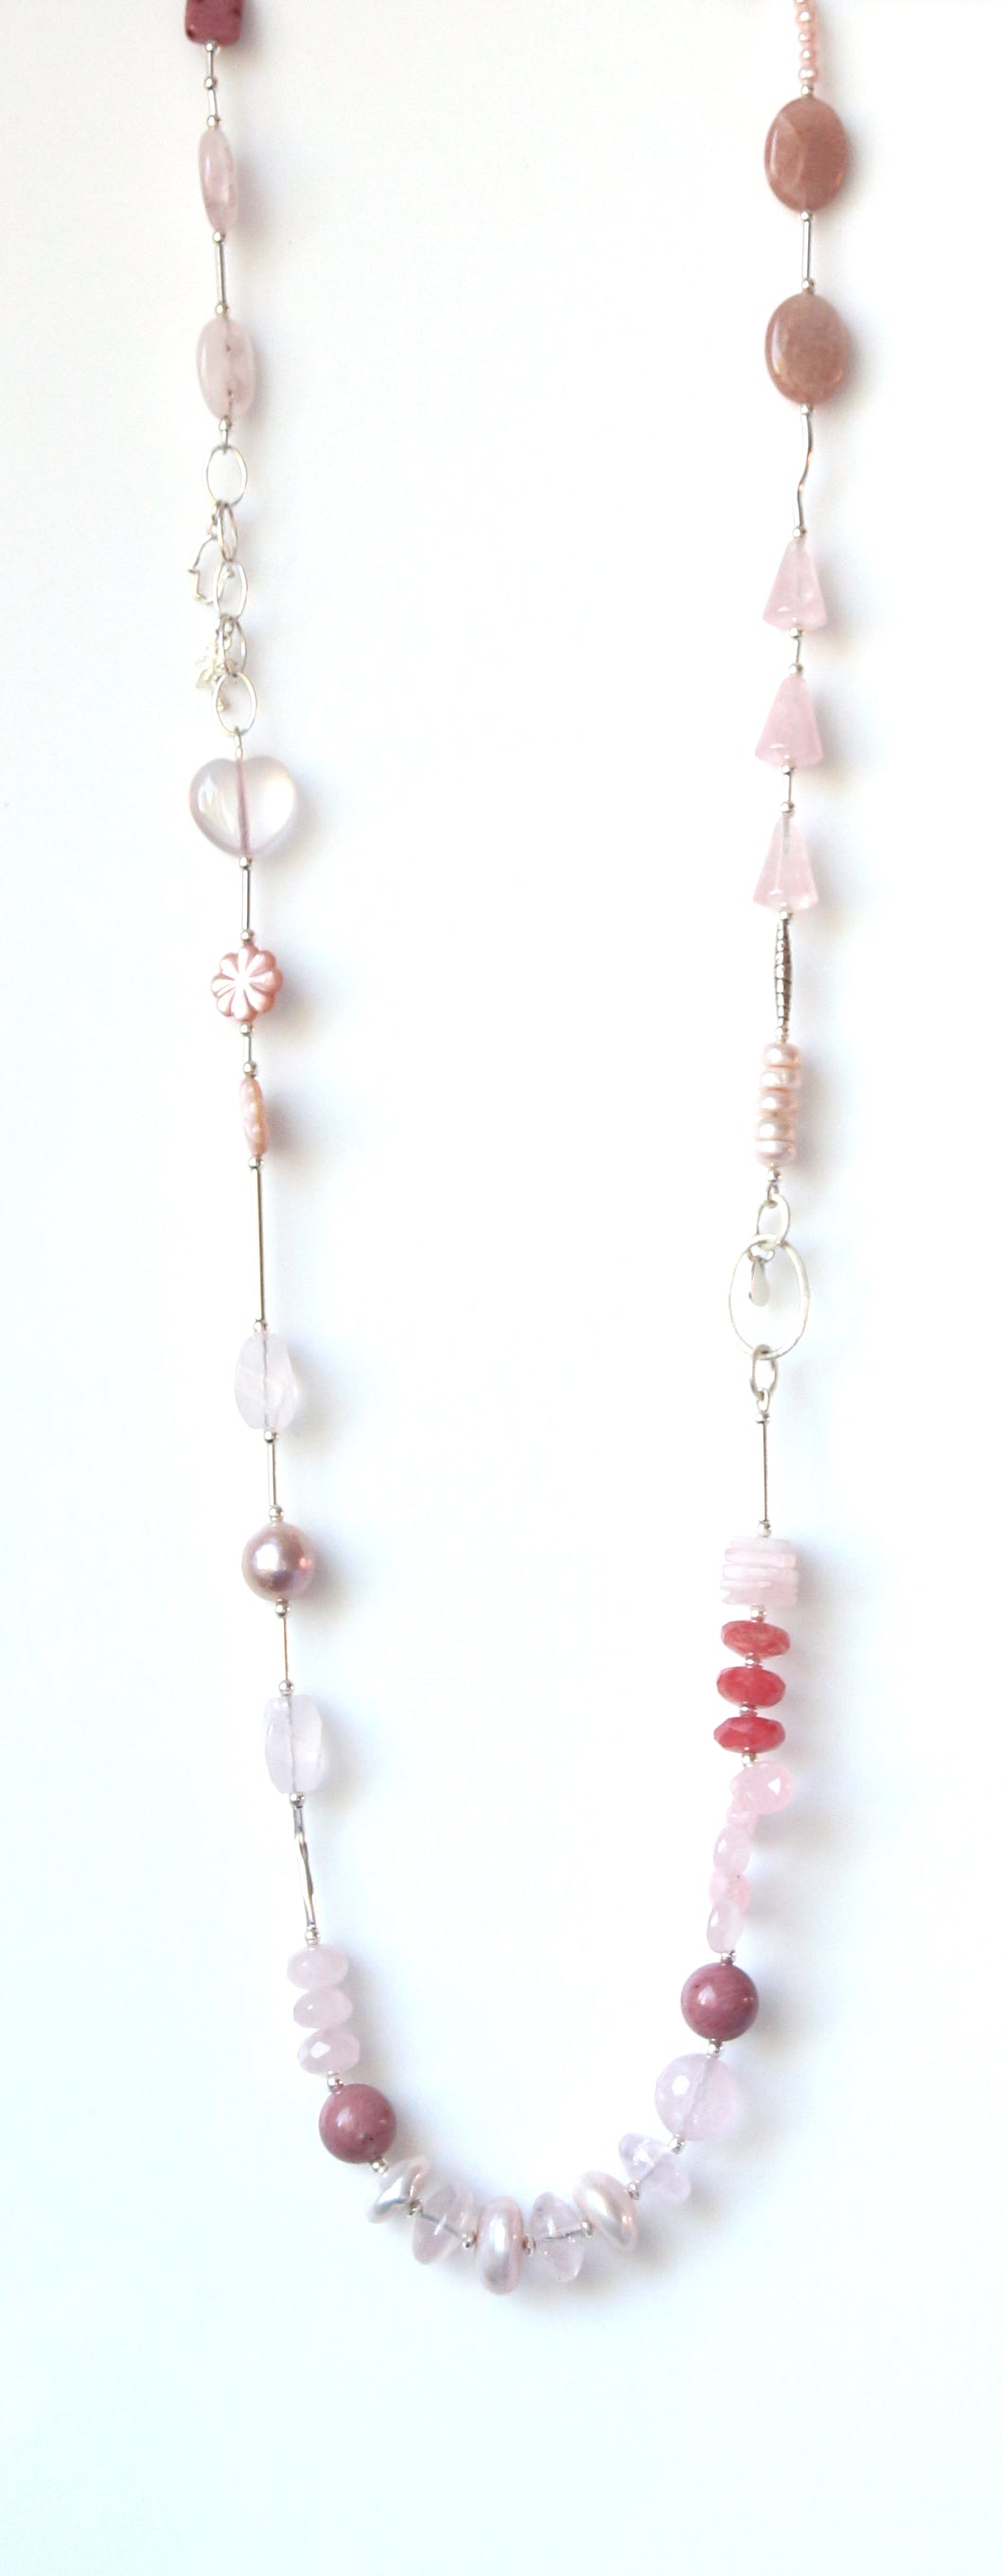 Australian Handmade Pink Necklace with Rose Quartz Moonstone Rhodonite Pearls and Sterling Silver